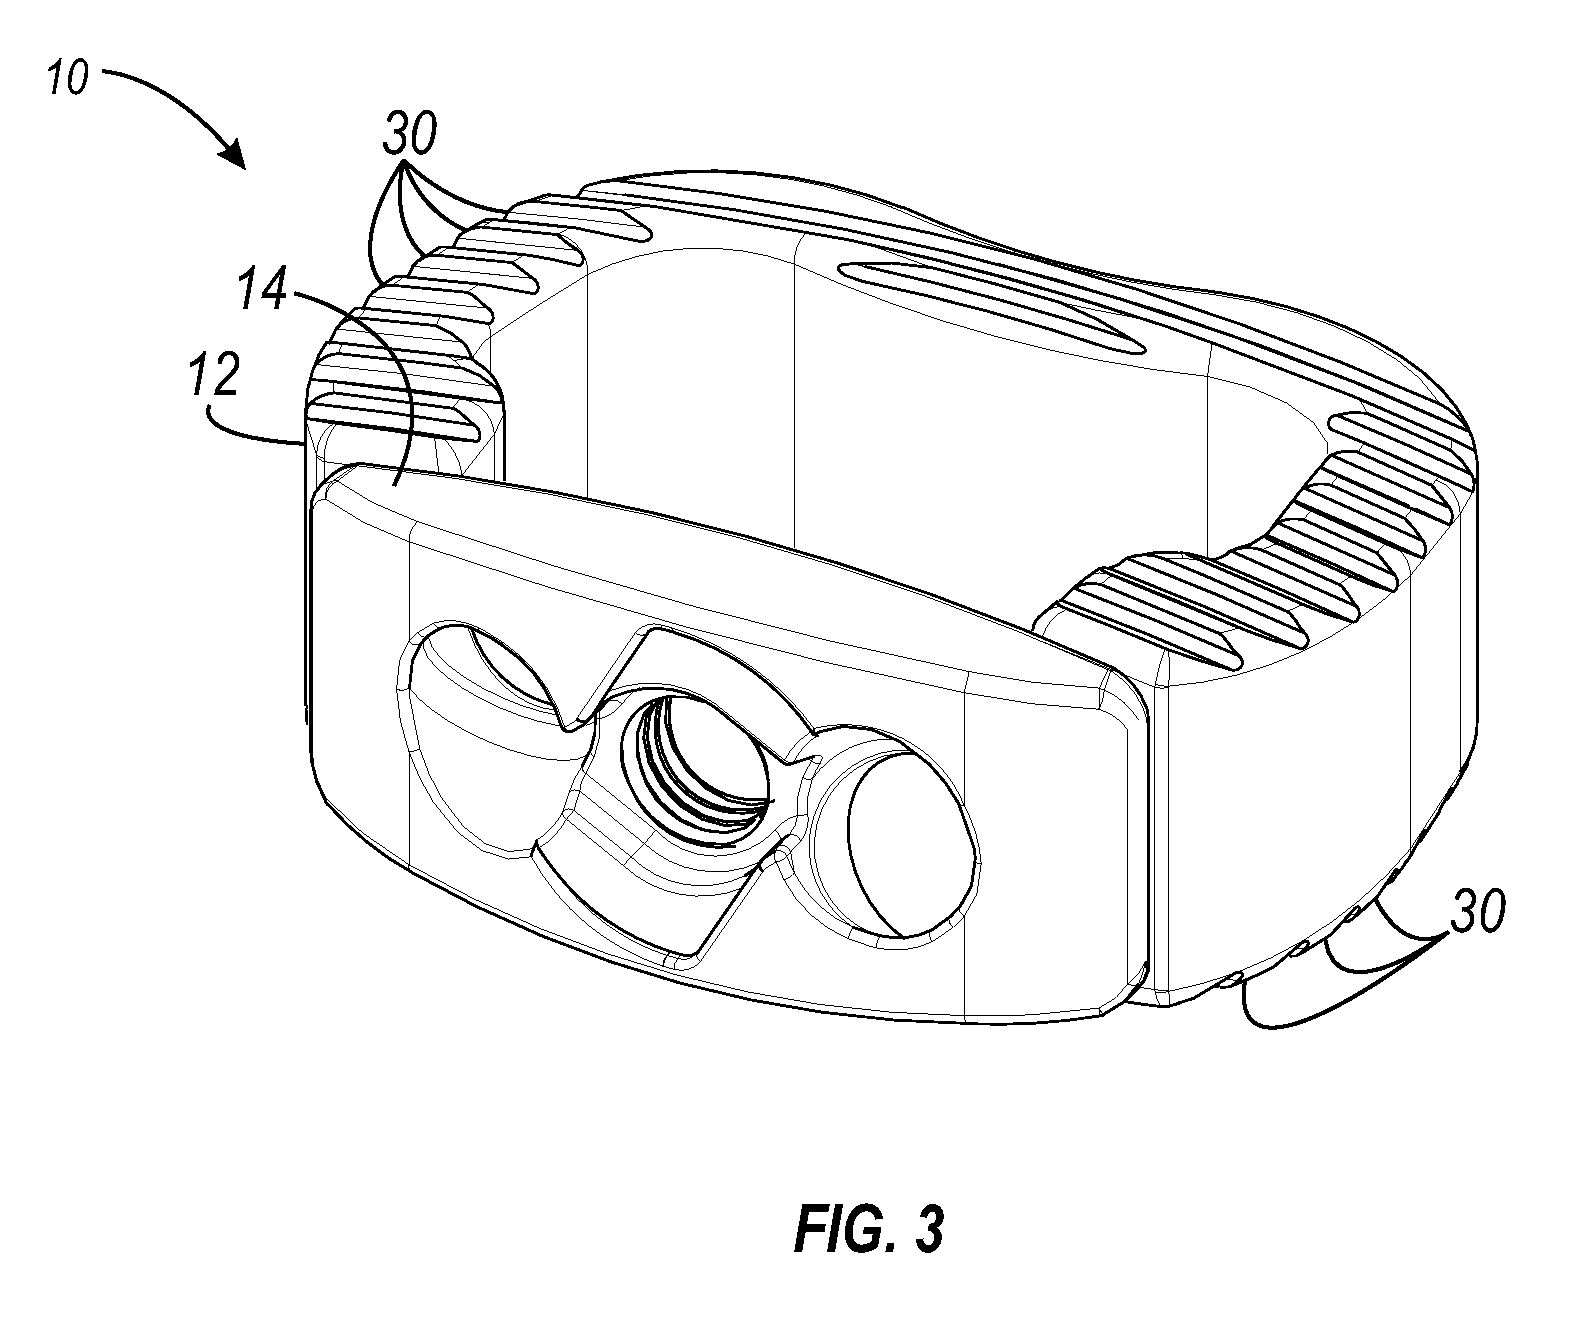 Interbody fusion device, integral retention device, and associated methods